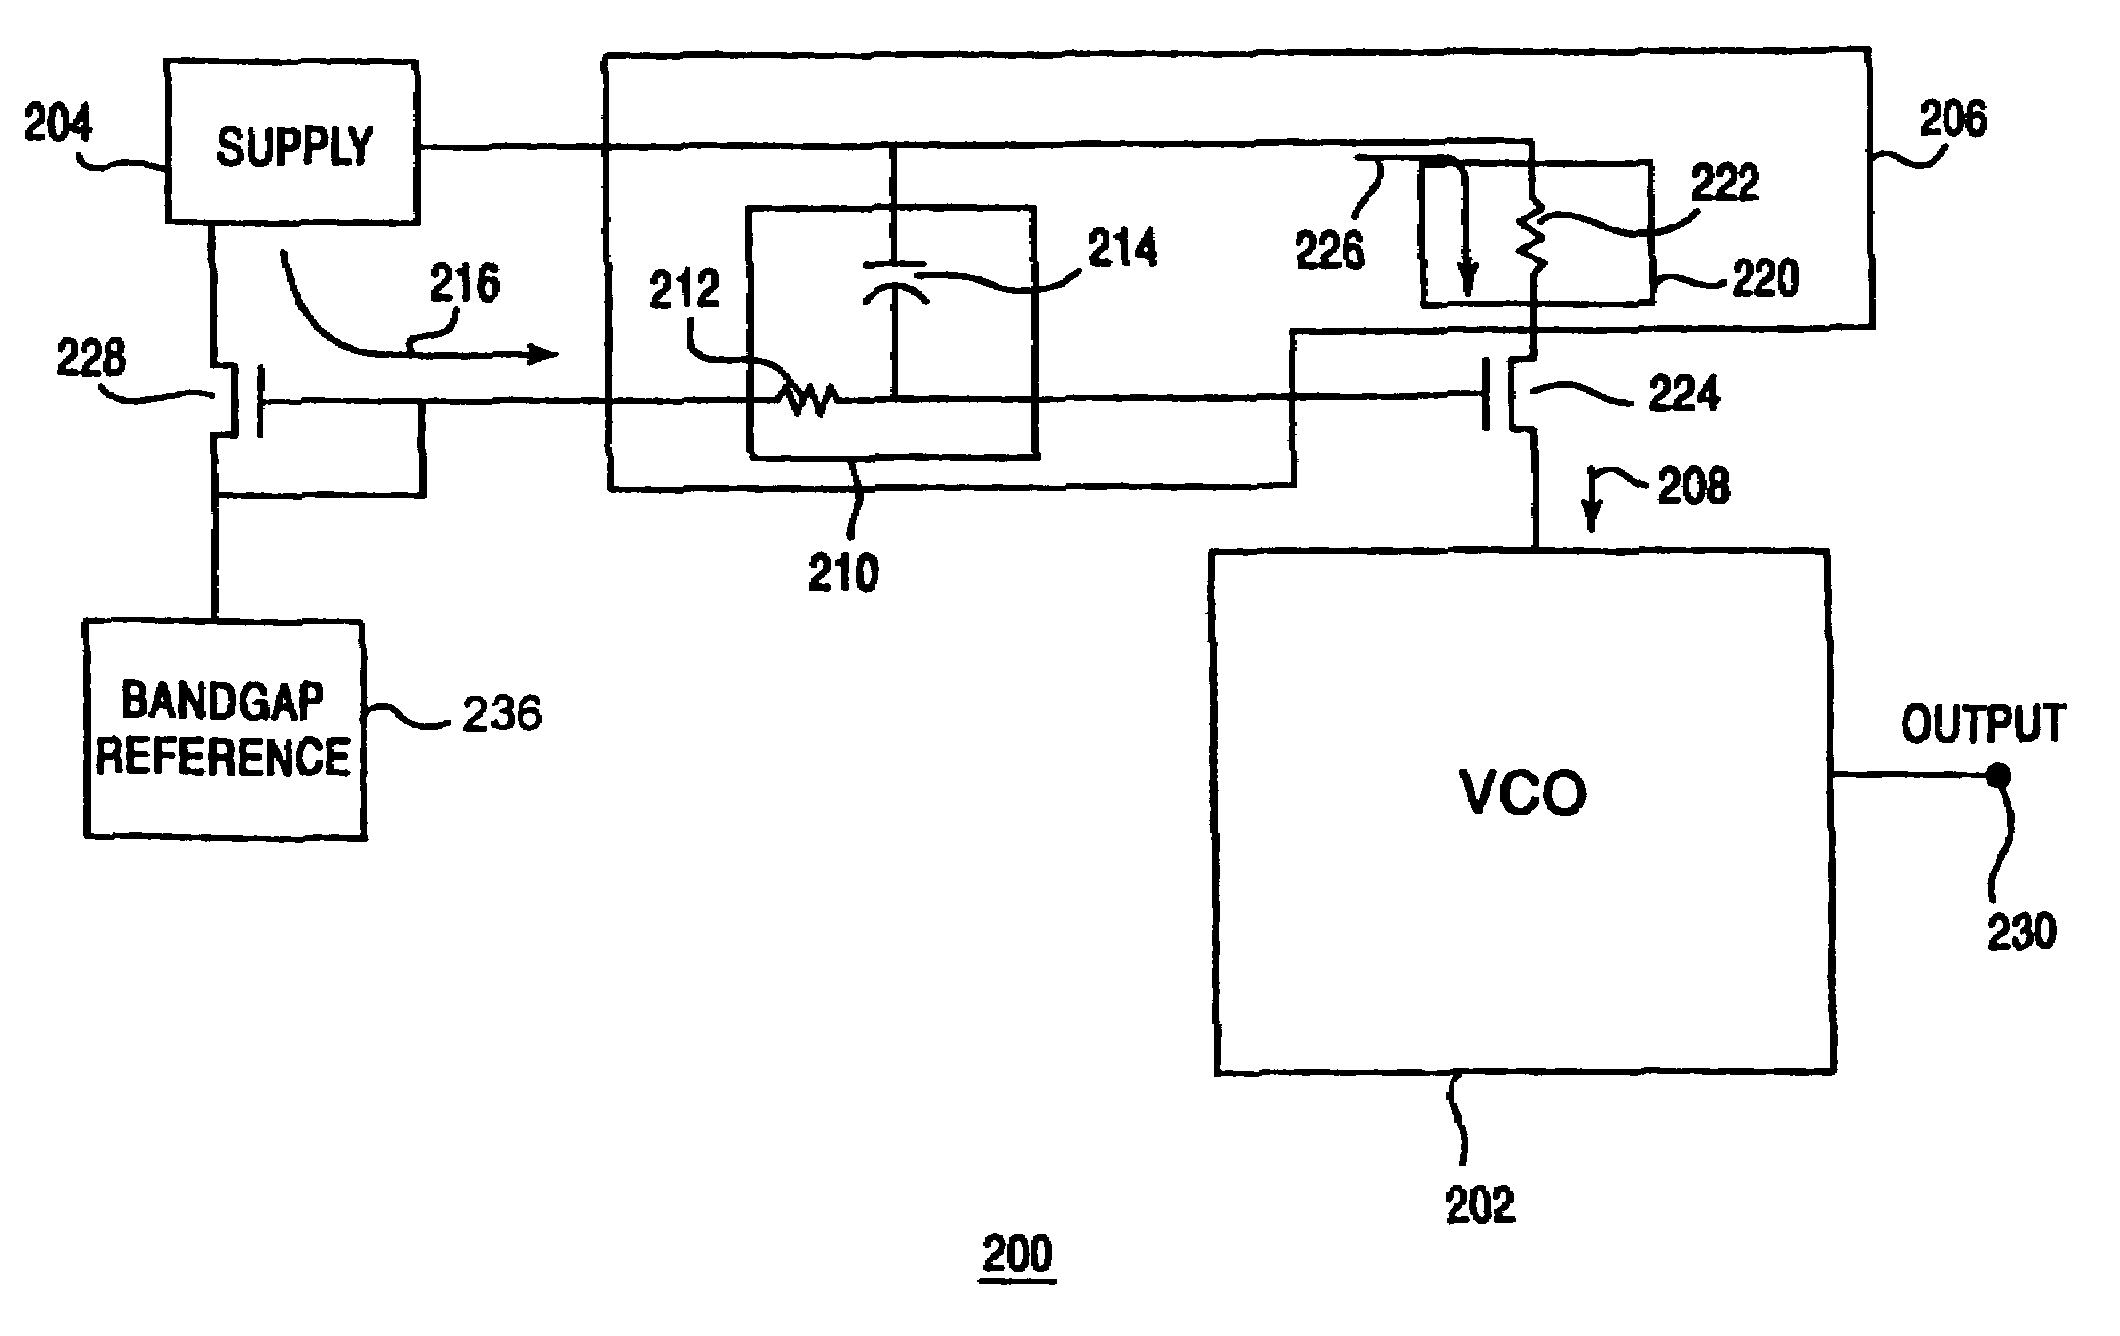 VCO with power supply rejection enhancement circuit